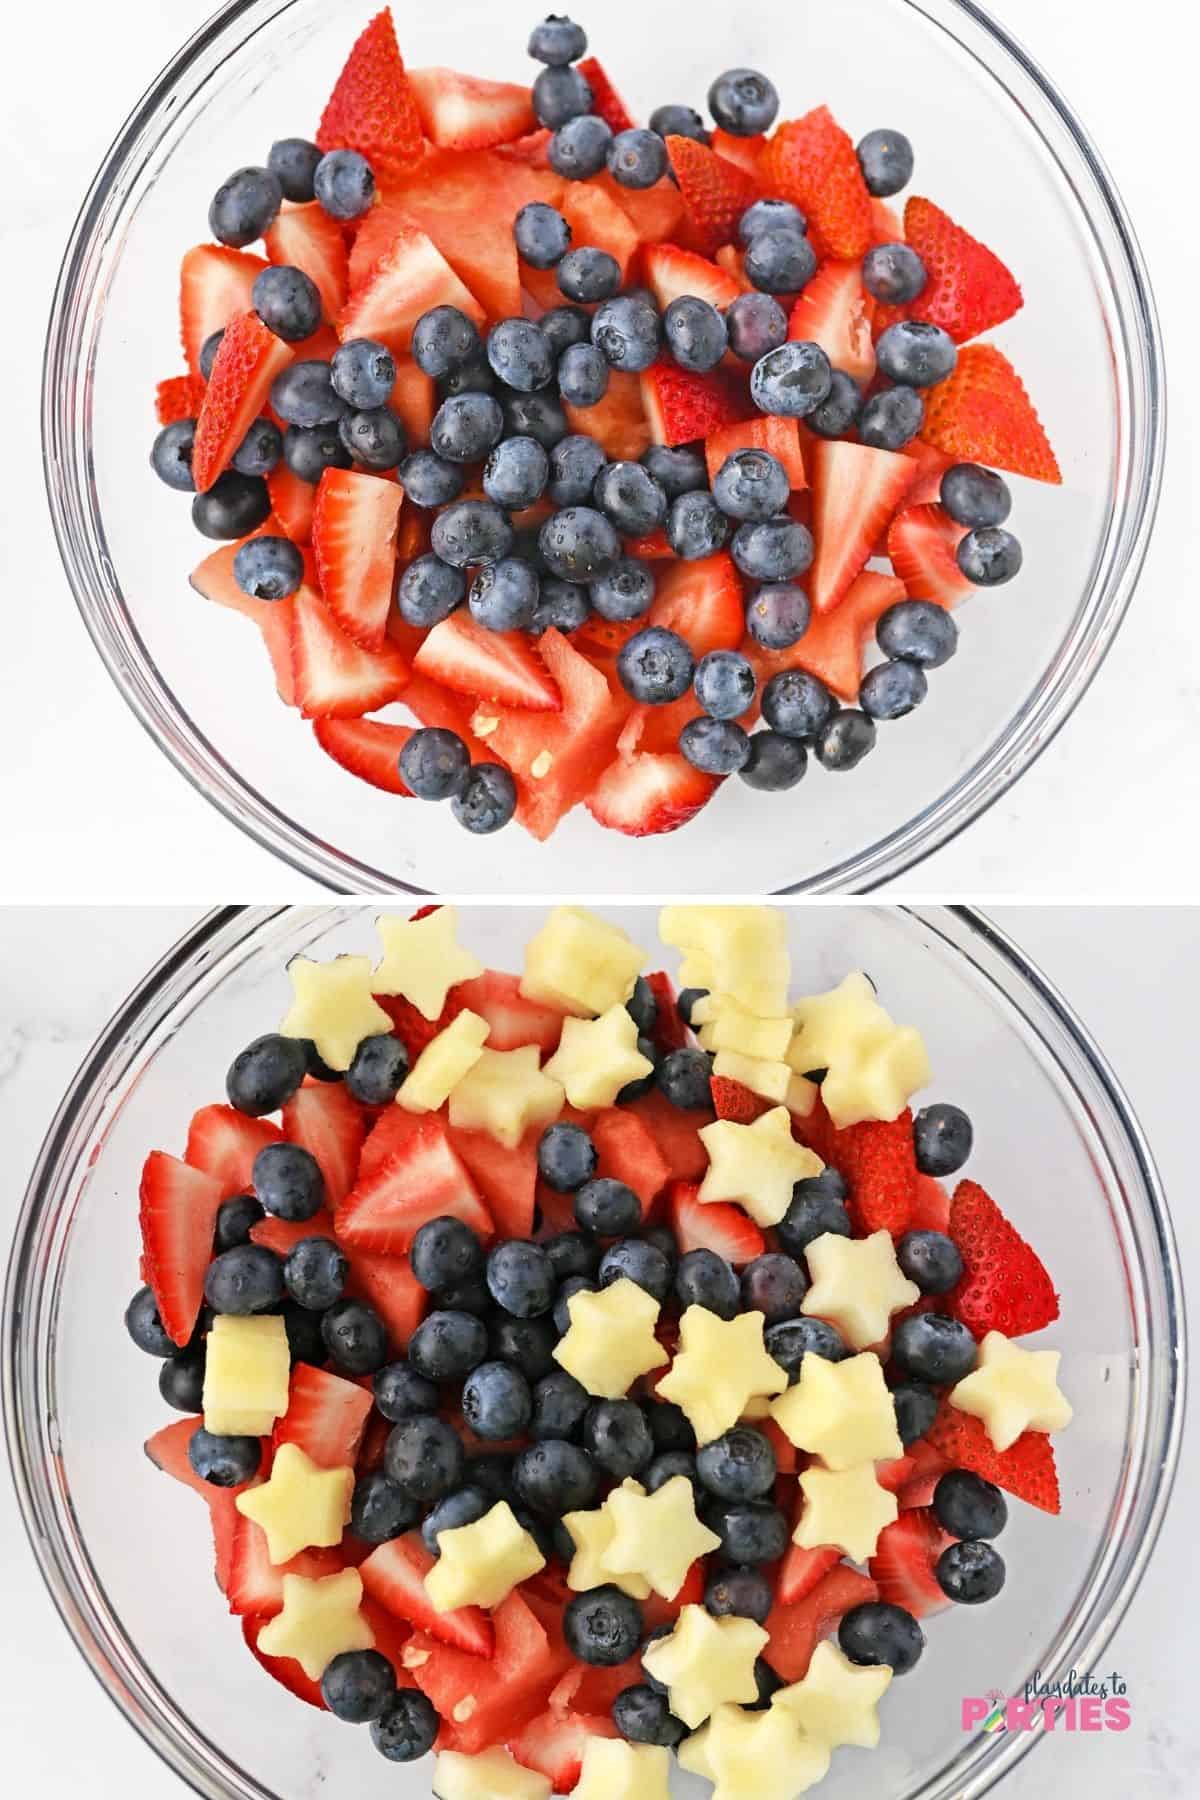 Layering the fruits so they look their best.